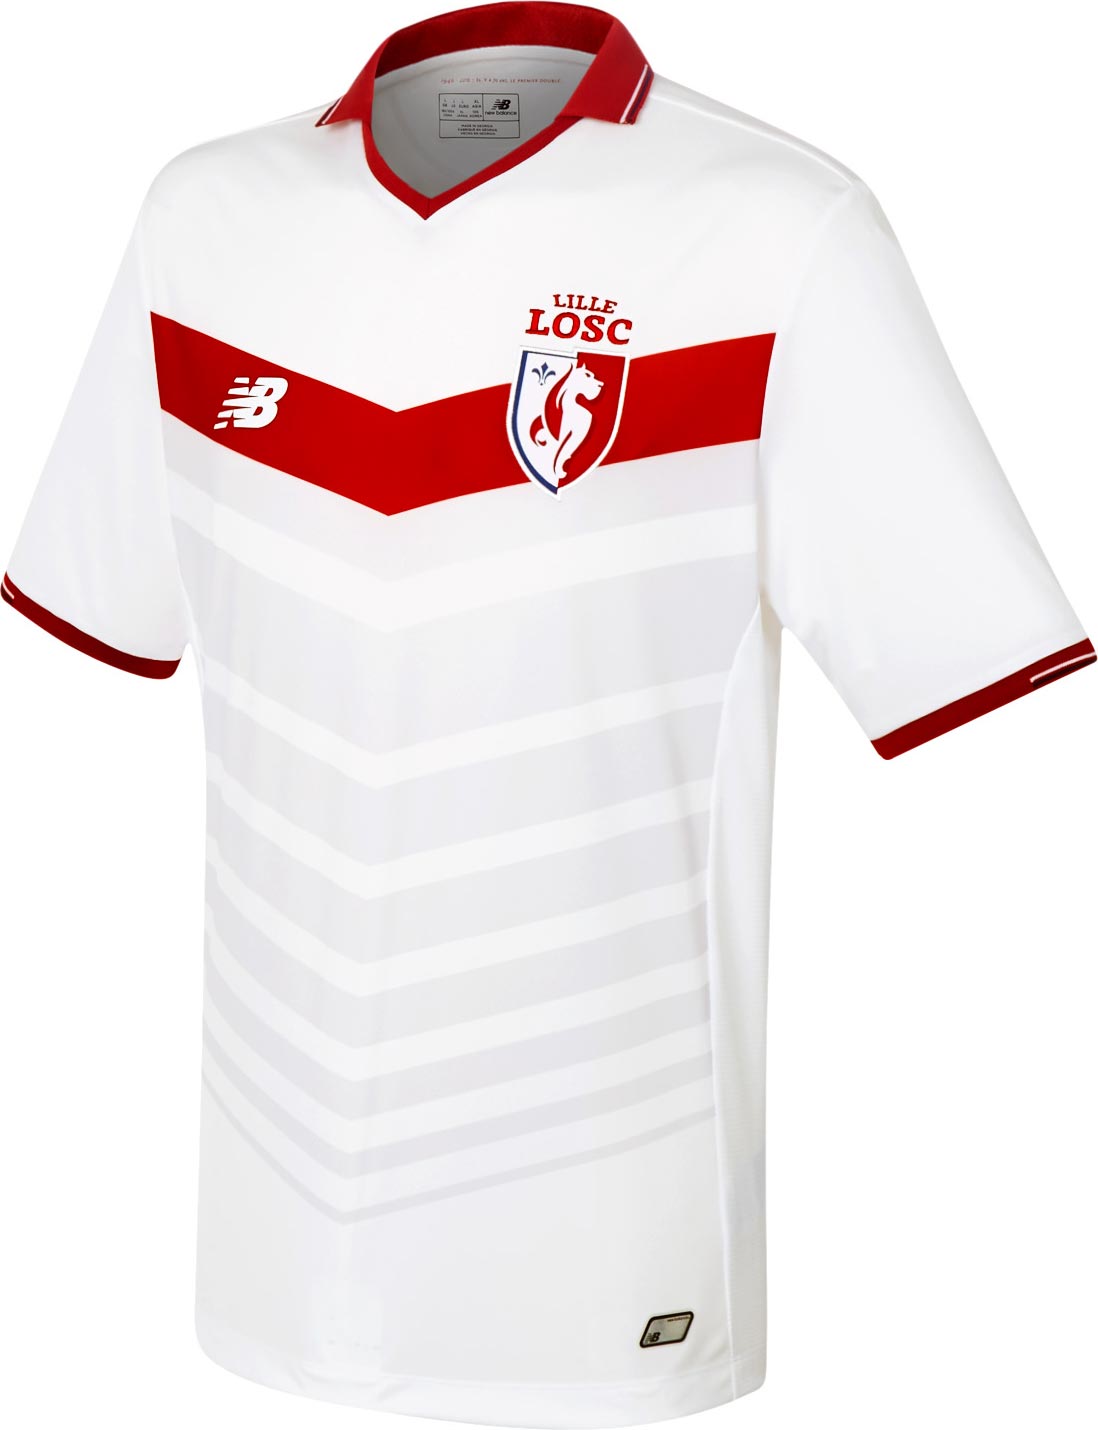 new balance a lille, This is the new Lille 2016-2017 home shirt by New Balance Football.